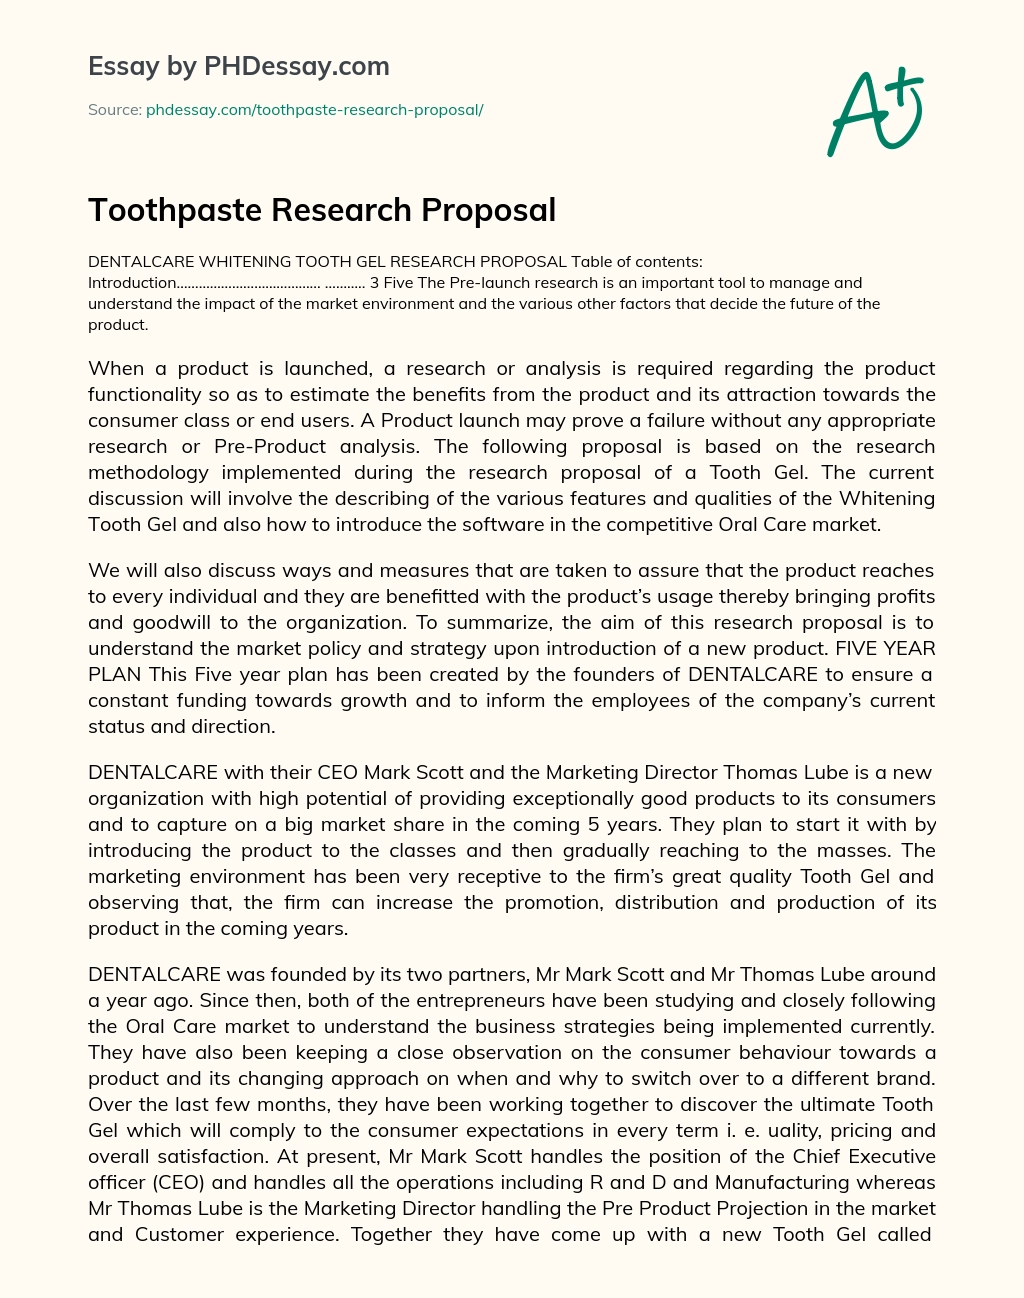 Toothpaste Research Proposal essay